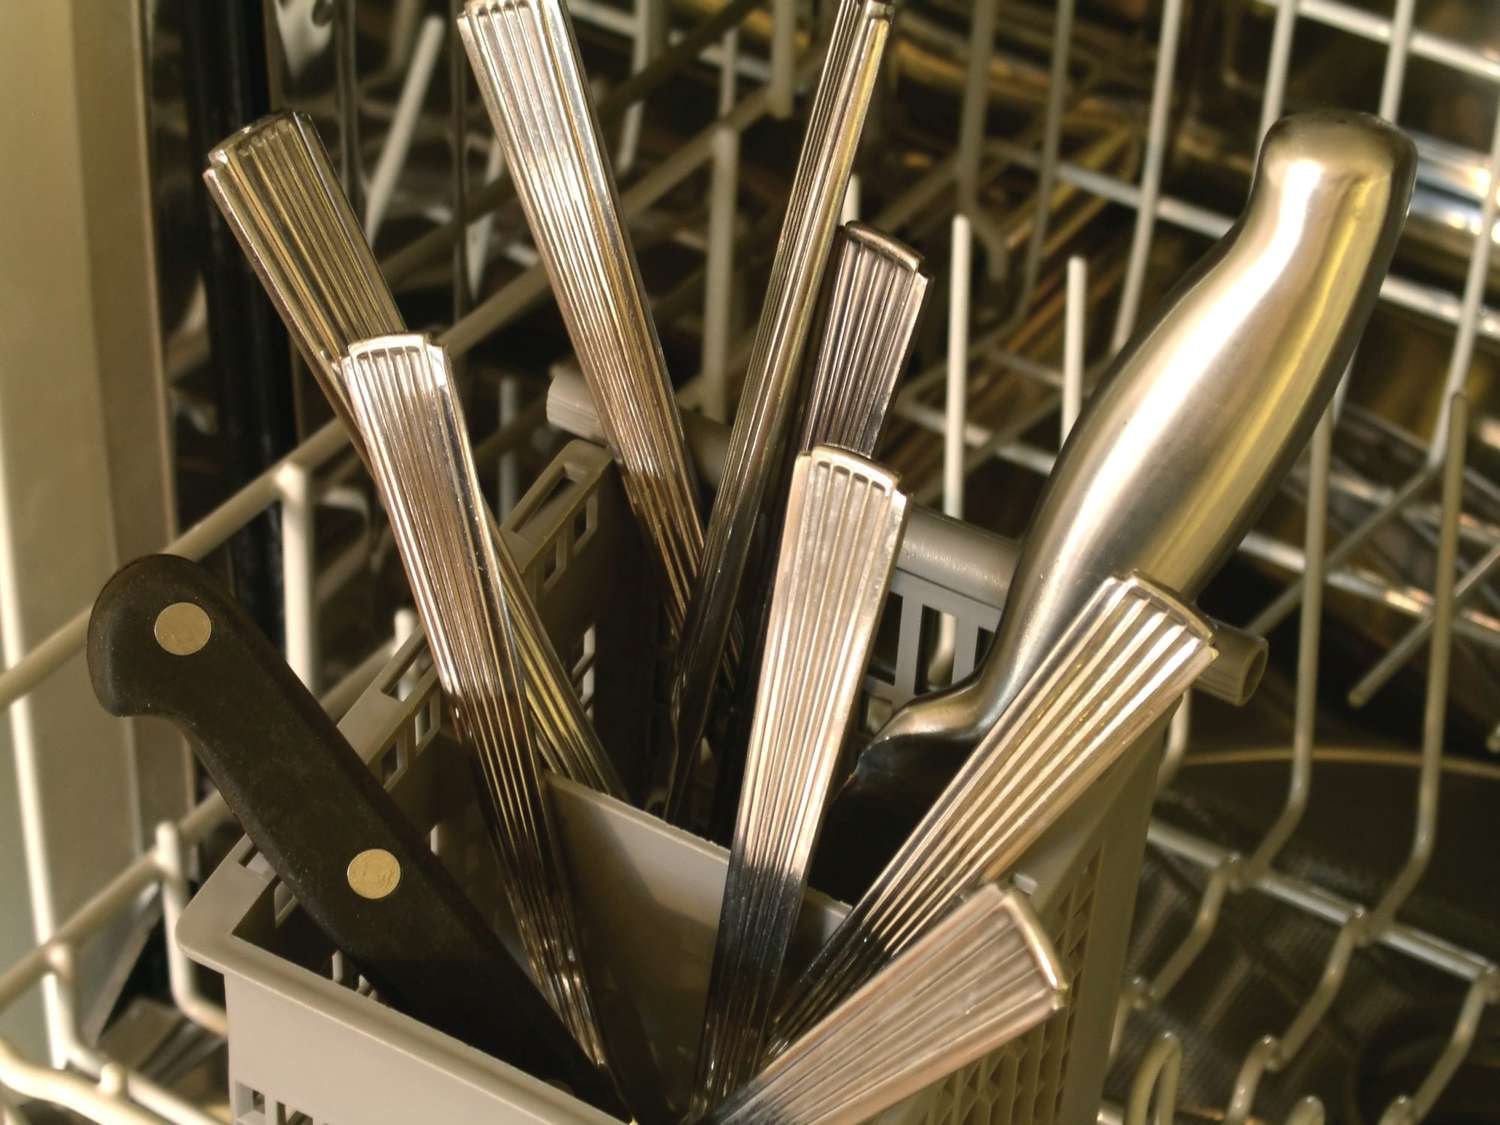 Should Silverware in the Dishwasher Be Loaded Upside Down?